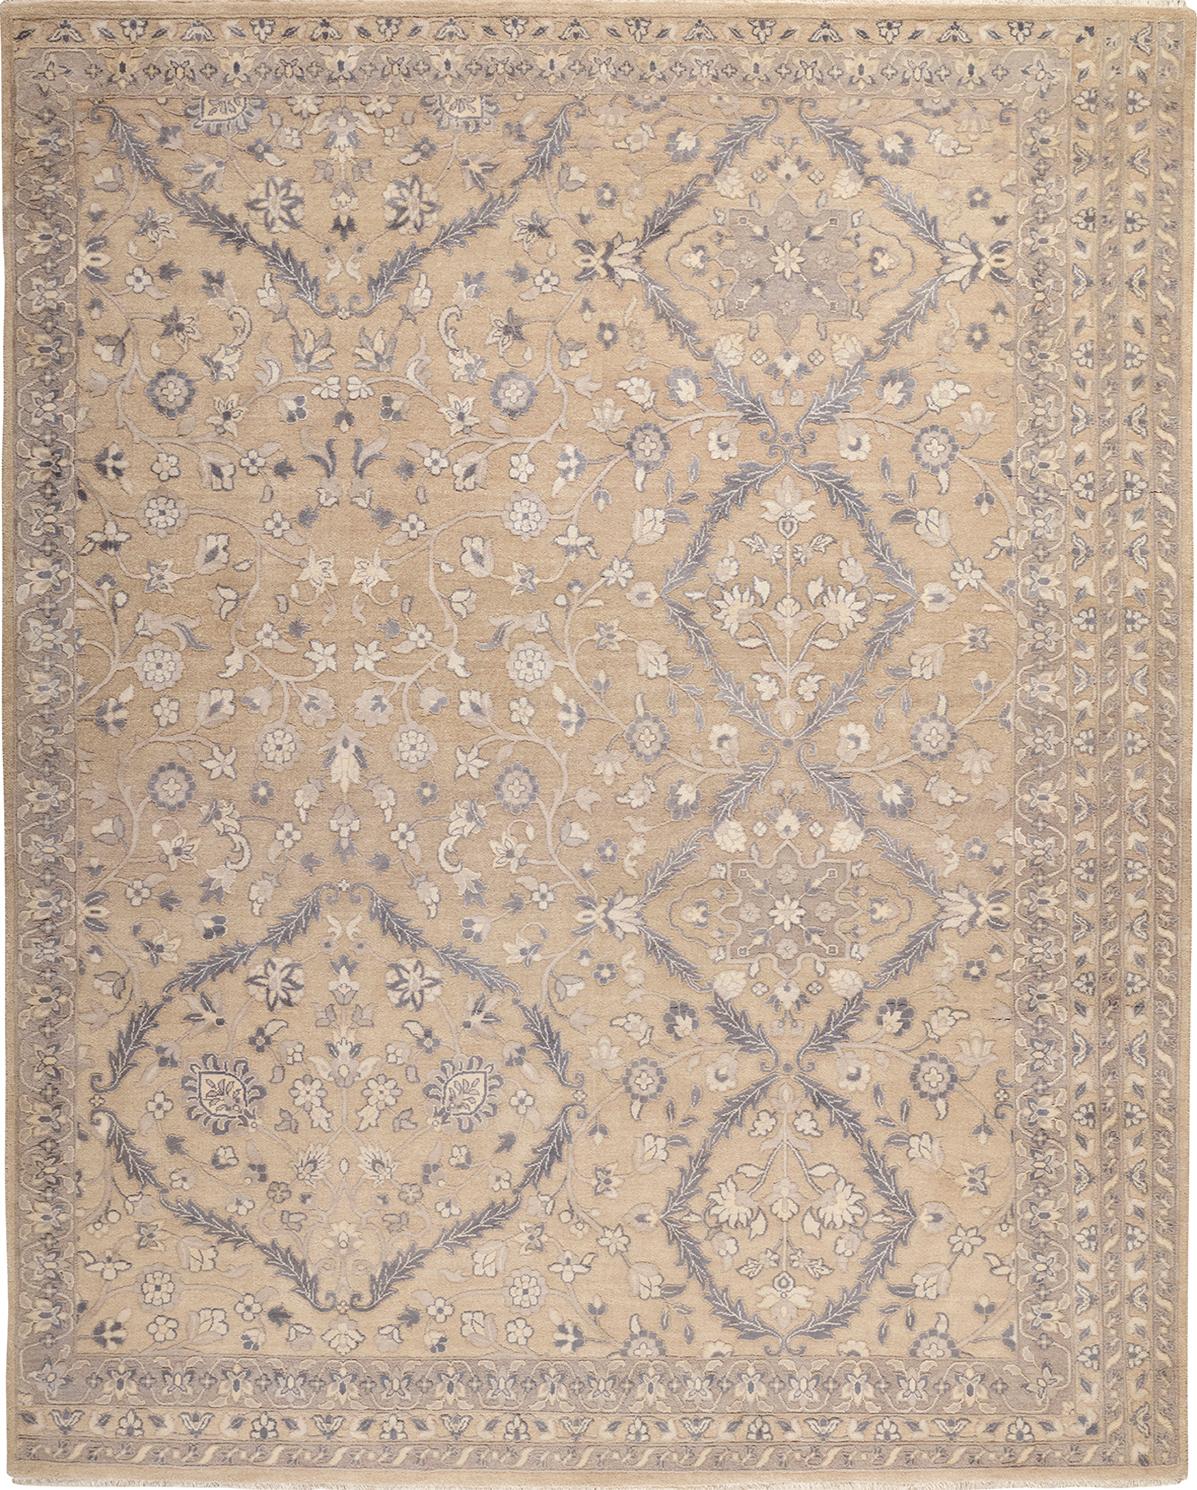 This delightful area size rug boasts exceptionally nuanced medallions that are made
even more fluid and elegant by their unique outlines, combining both organic and
meandering contours. Chandelier-like boteh motifs in the wide outer border are